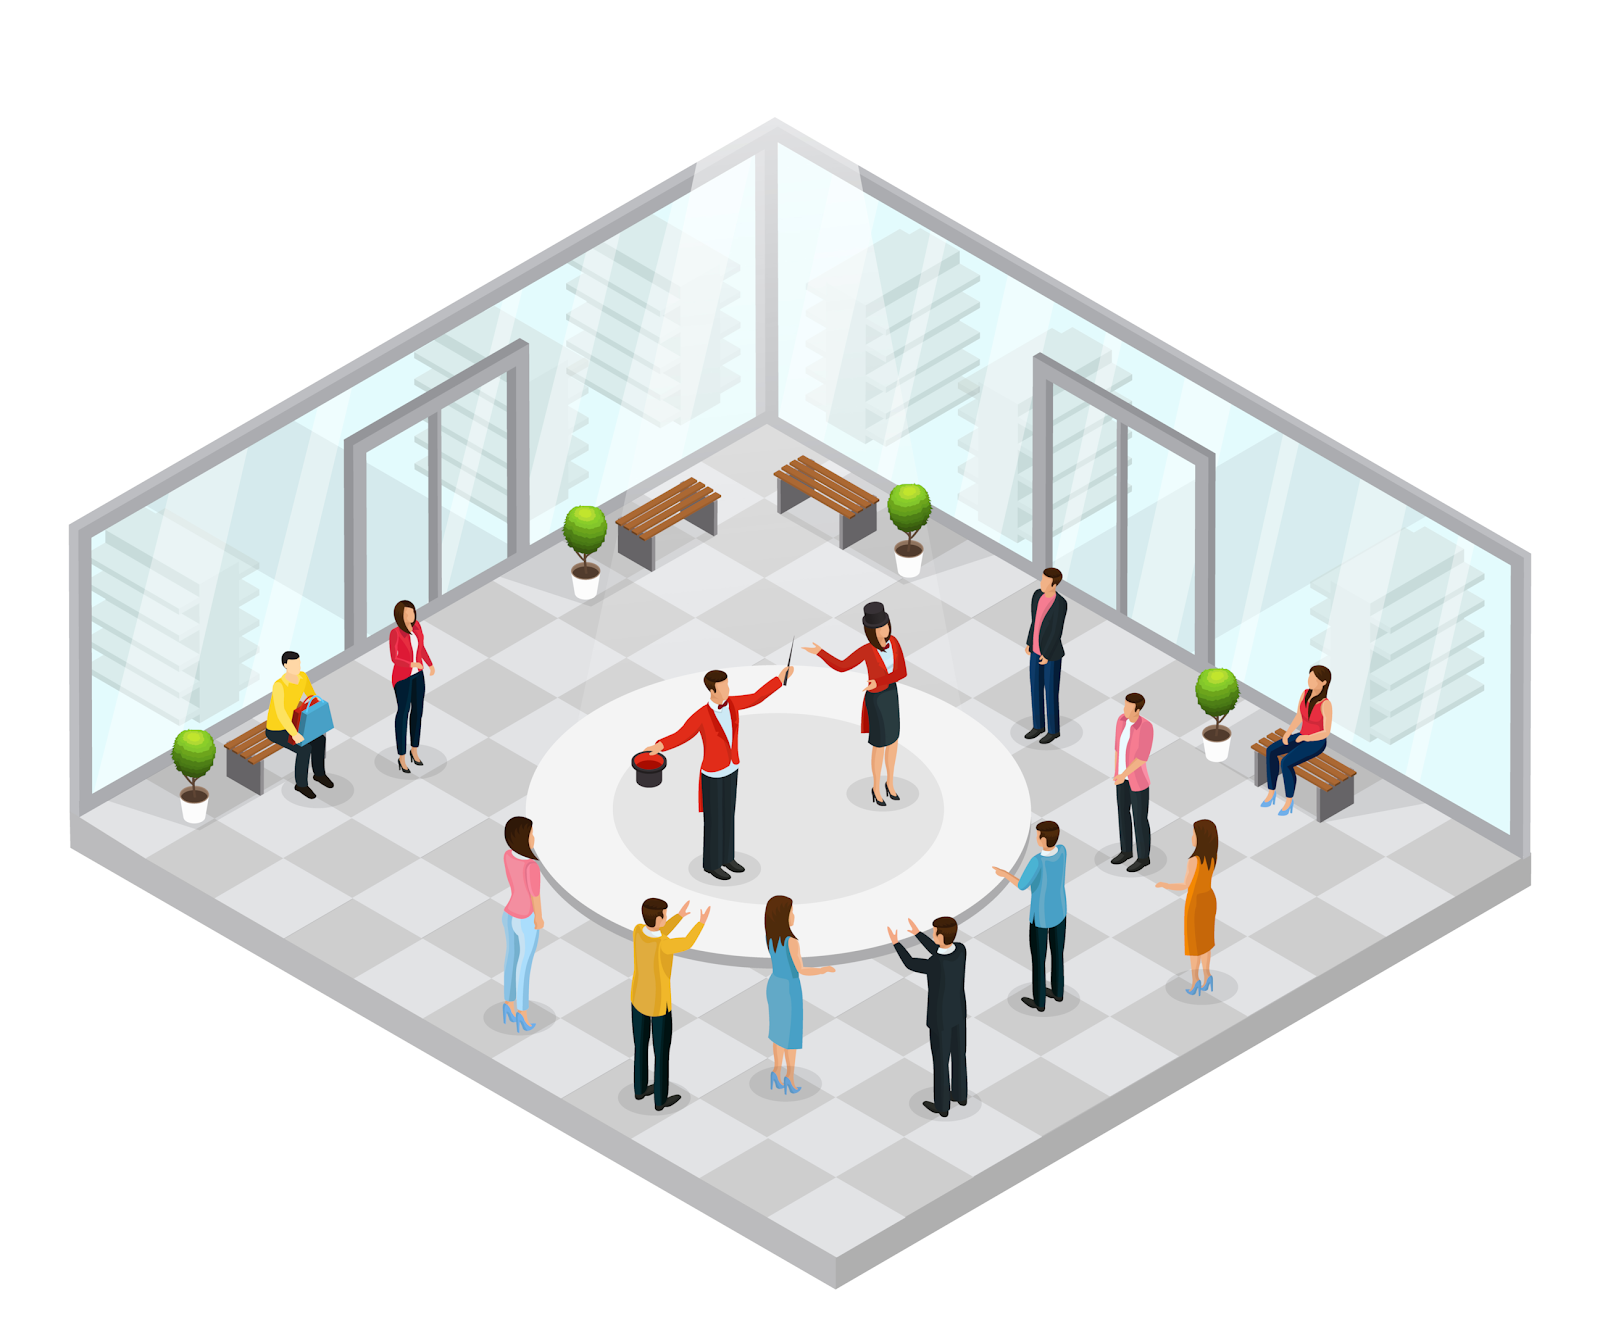 An image of a game with isometric perspective and characters